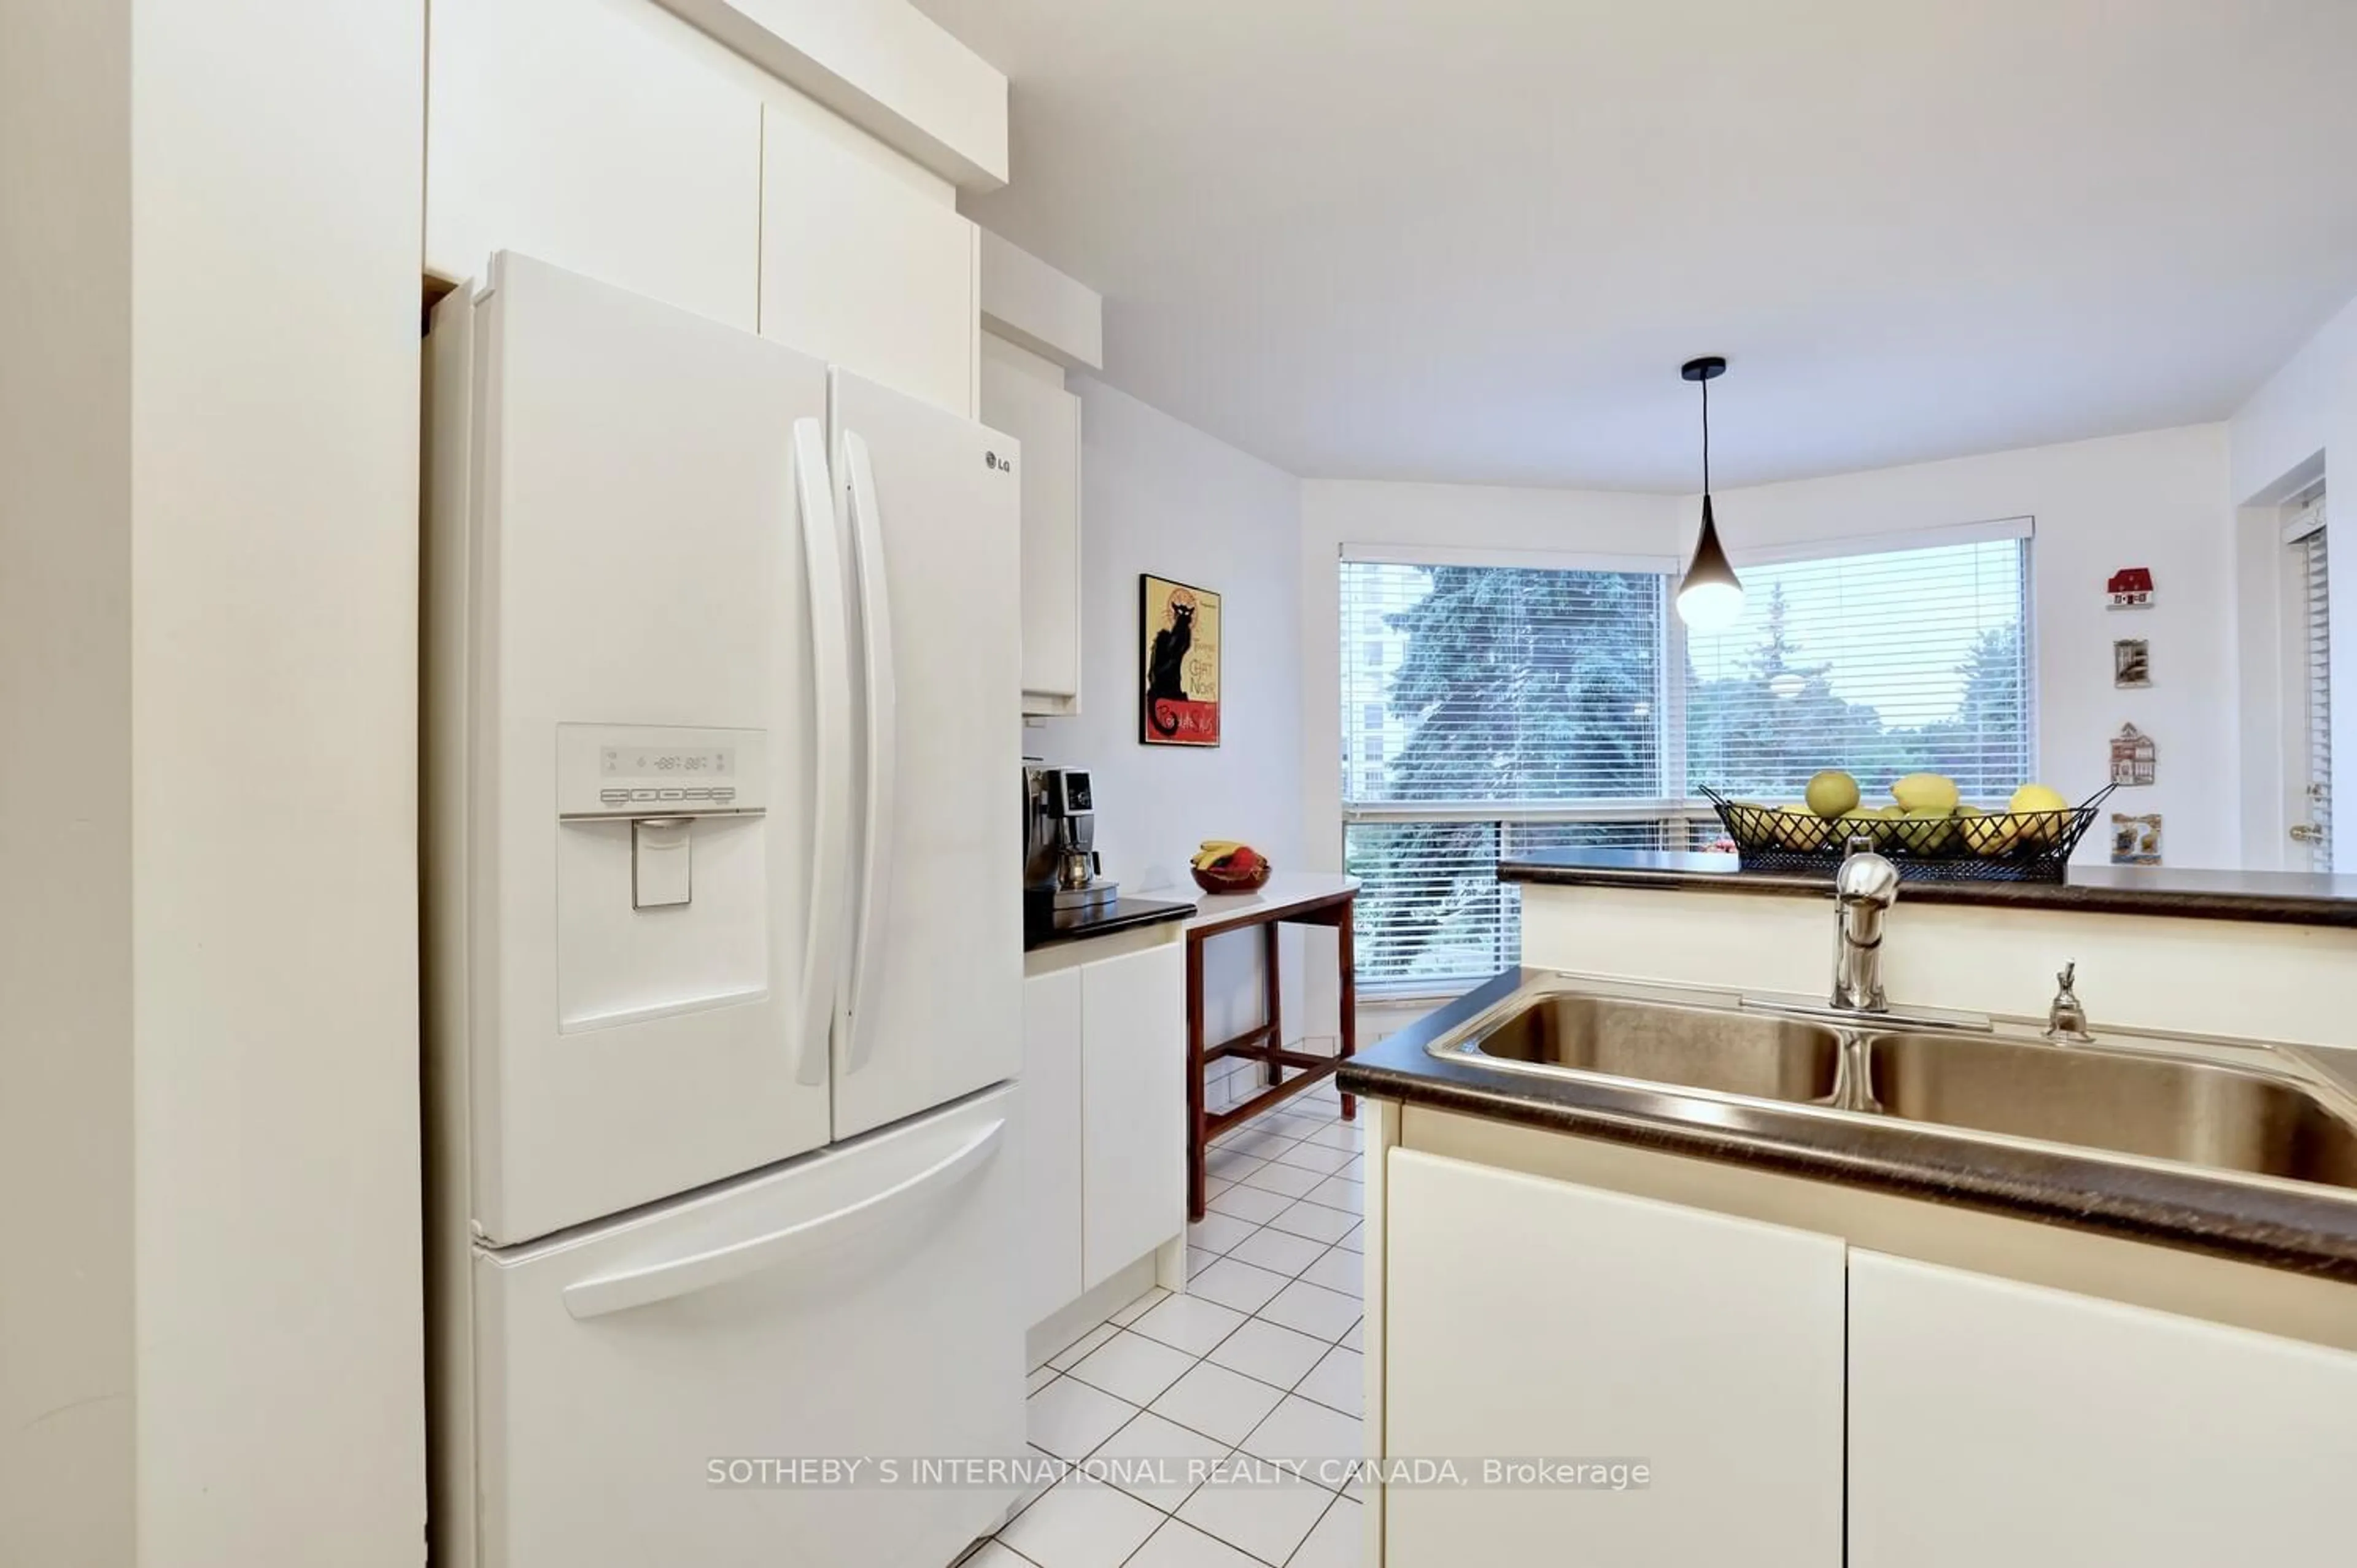 Kitchen with laundary machines for 1800 The Collegeway #203, Mississauga Ontario L5L 5S4